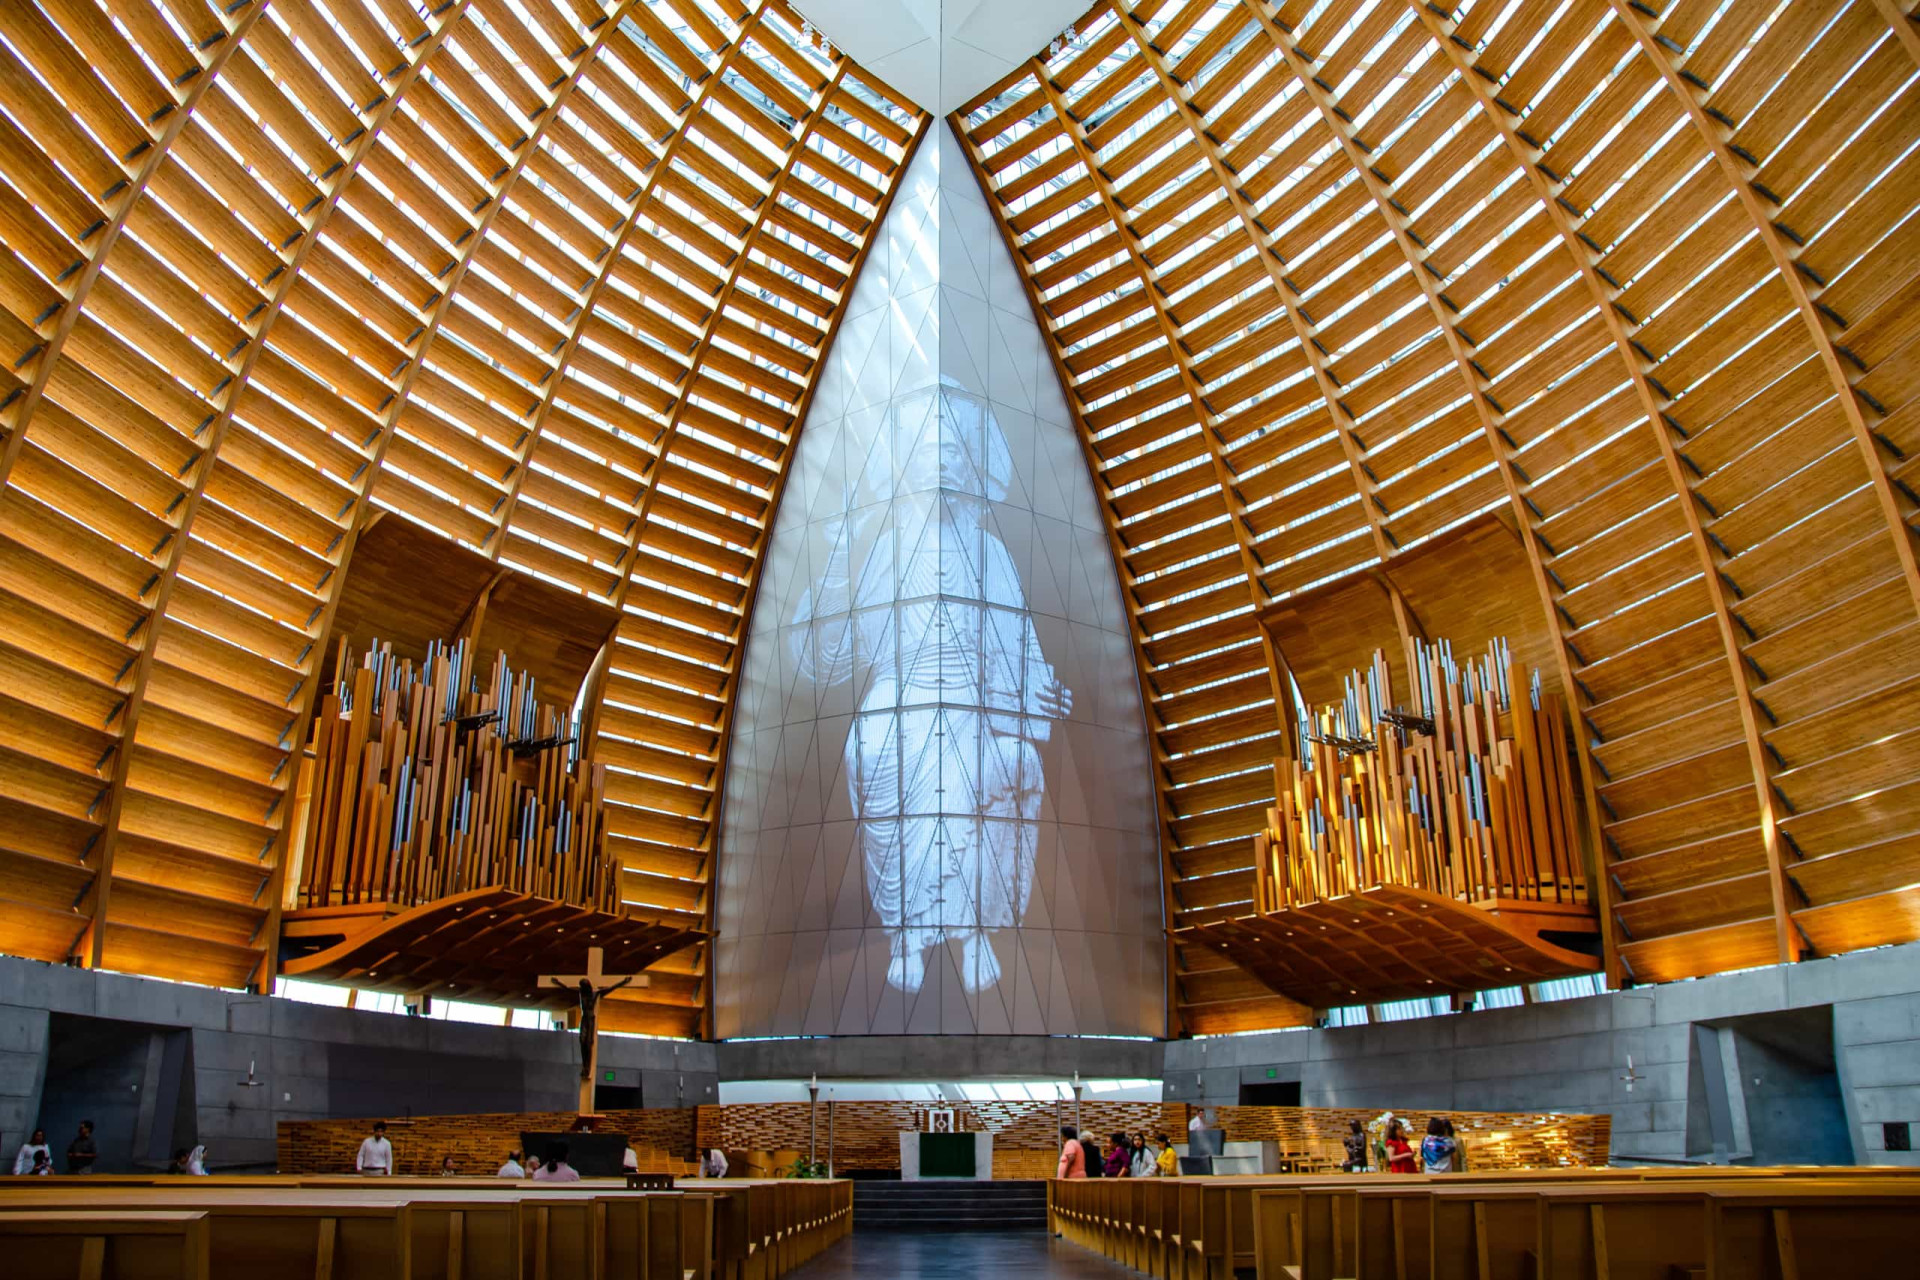 <p>Even if you're not particularly religious, a walk through the stunning Cathedral of Christ the Light interior instills a sense of solace and spiritual renewal.</p><p>You may also like:<a href="https://www.starsinsider.com/n/424116?utm_source=msn.com&utm_medium=display&utm_campaign=referral_description&utm_content=198095v22en-en"> 55 amazing images of beautiful and enigmatic owls </a></p>